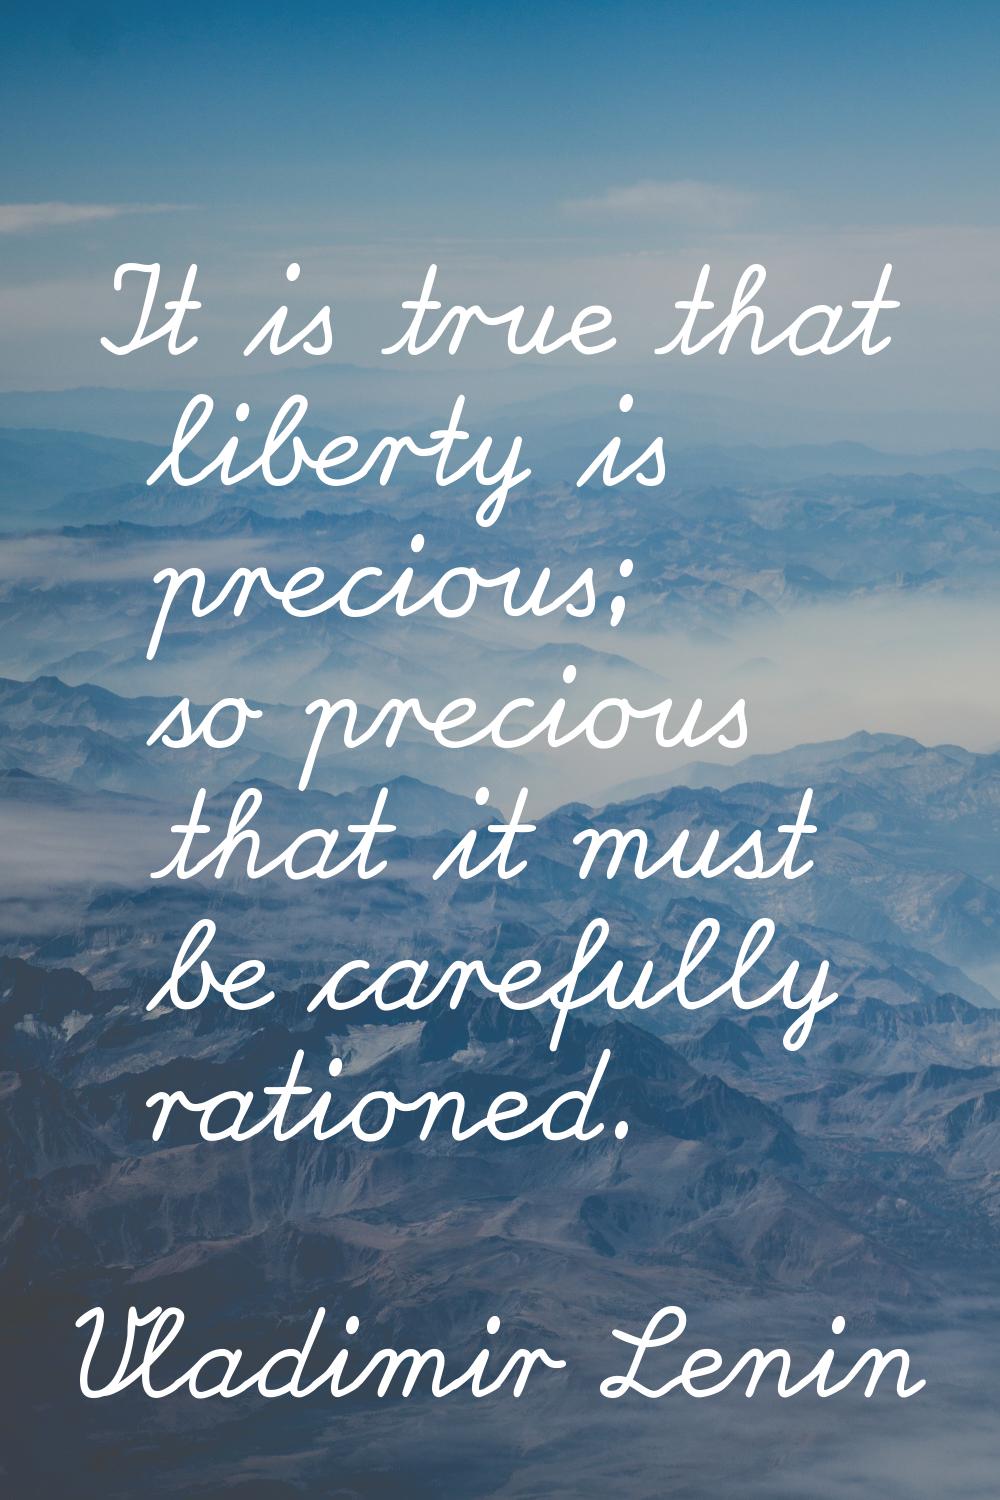 It is true that liberty is precious; so precious that it must be carefully rationed.